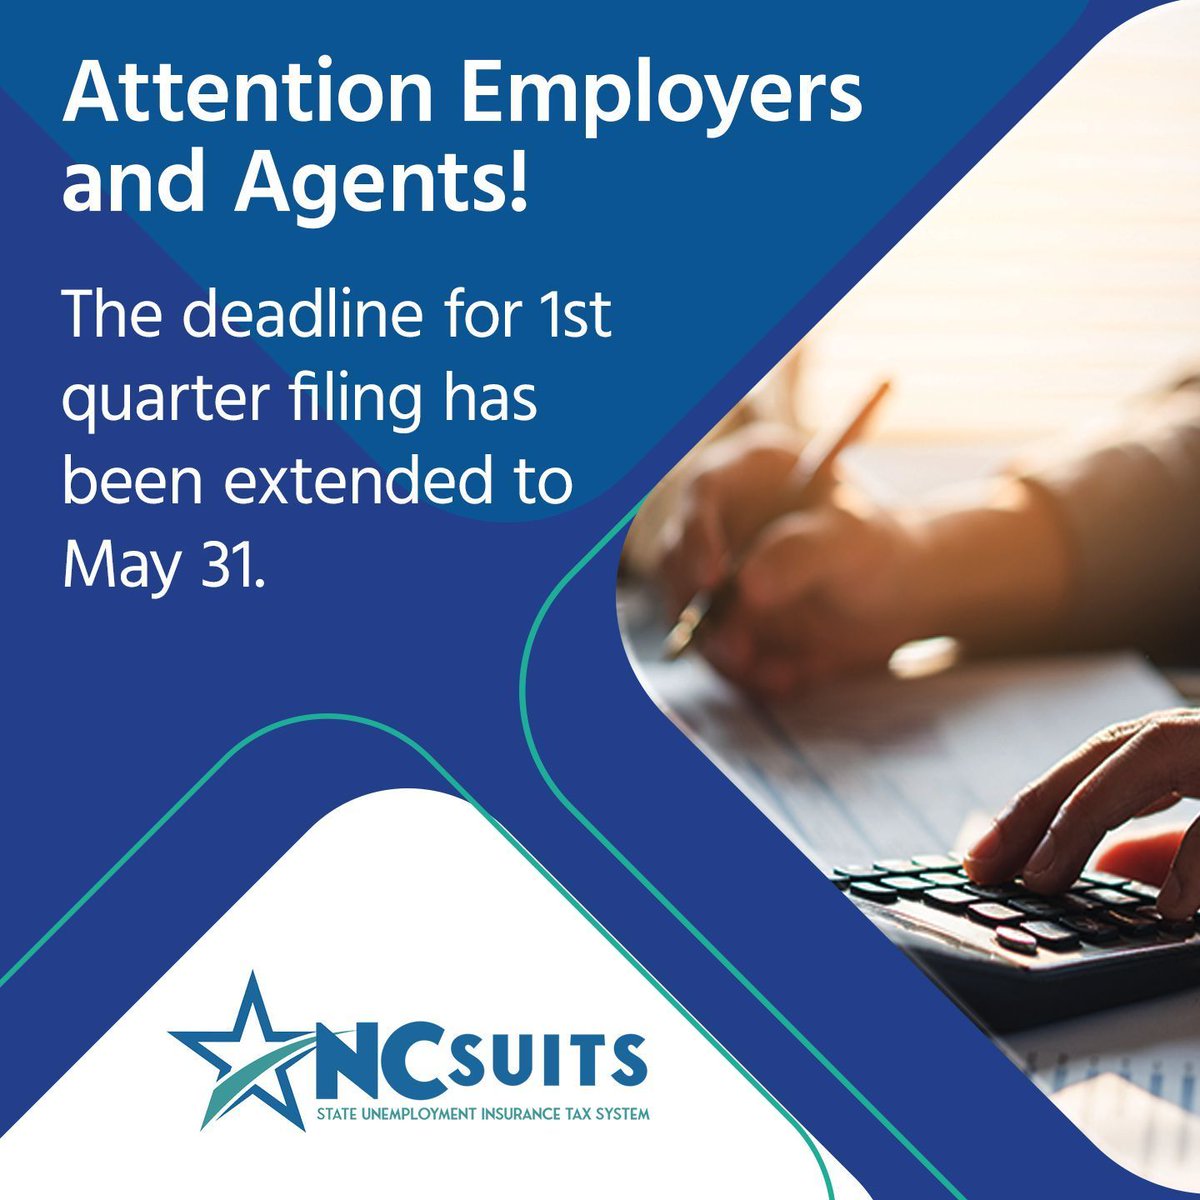 Attention Employers and Agents! The deadline for 1st quarter filing has been extended to May 31. Get details about filing in #NCSUITS at: buff.ly/3QNx25V